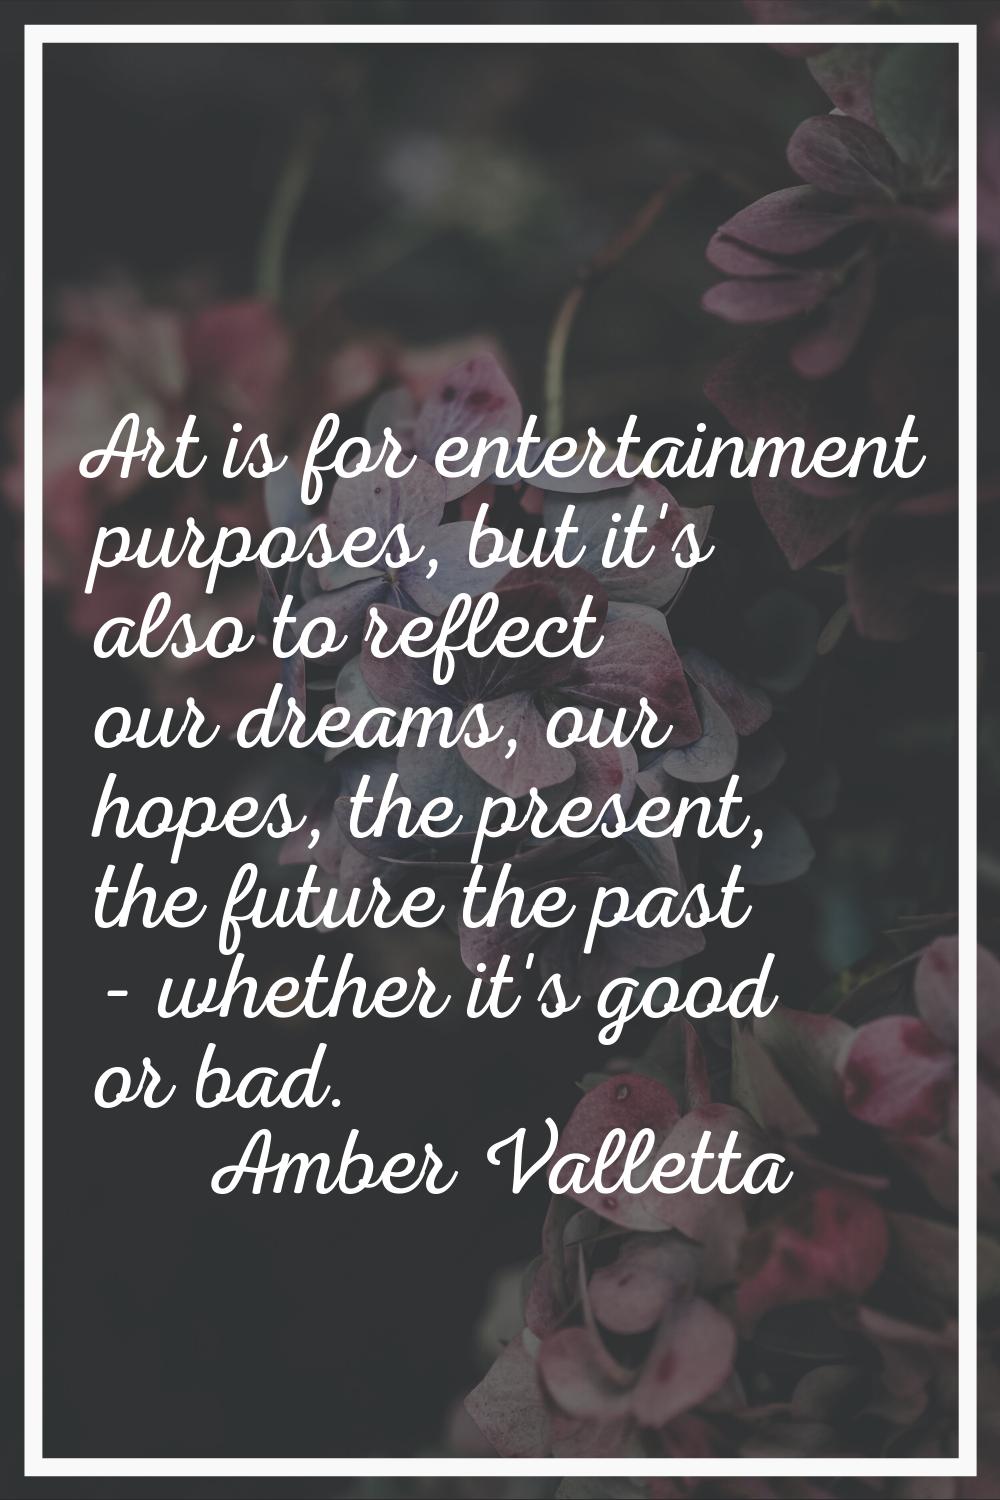 Art is for entertainment purposes, but it's also to reflect our dreams, our hopes, the present, the